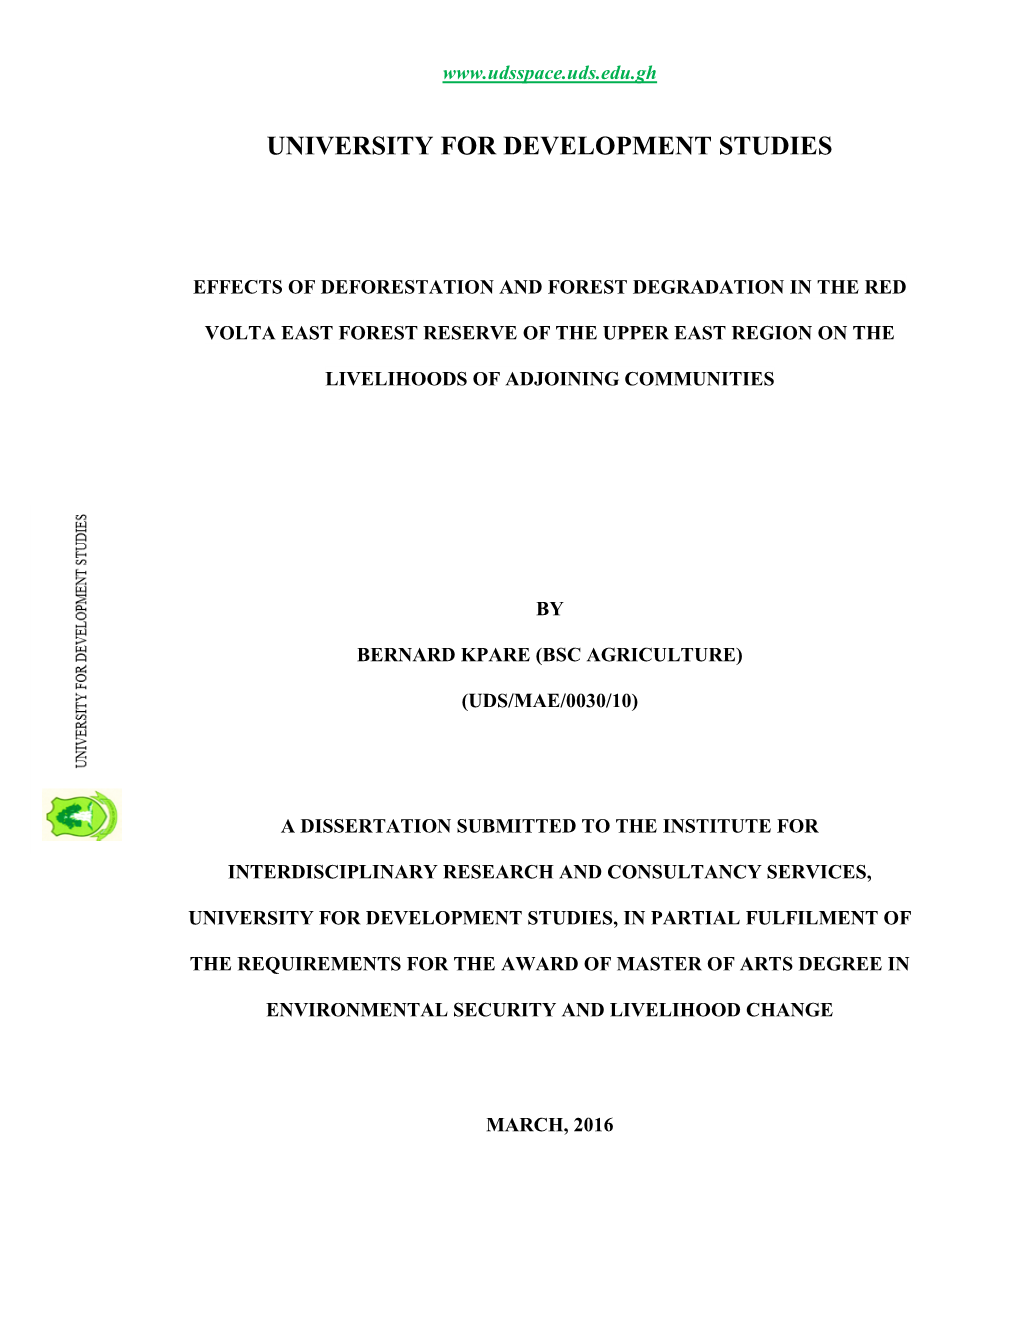 Effects of Deforestation and Forest Degradation in the Red Volta East Forest Reserve of the Upper